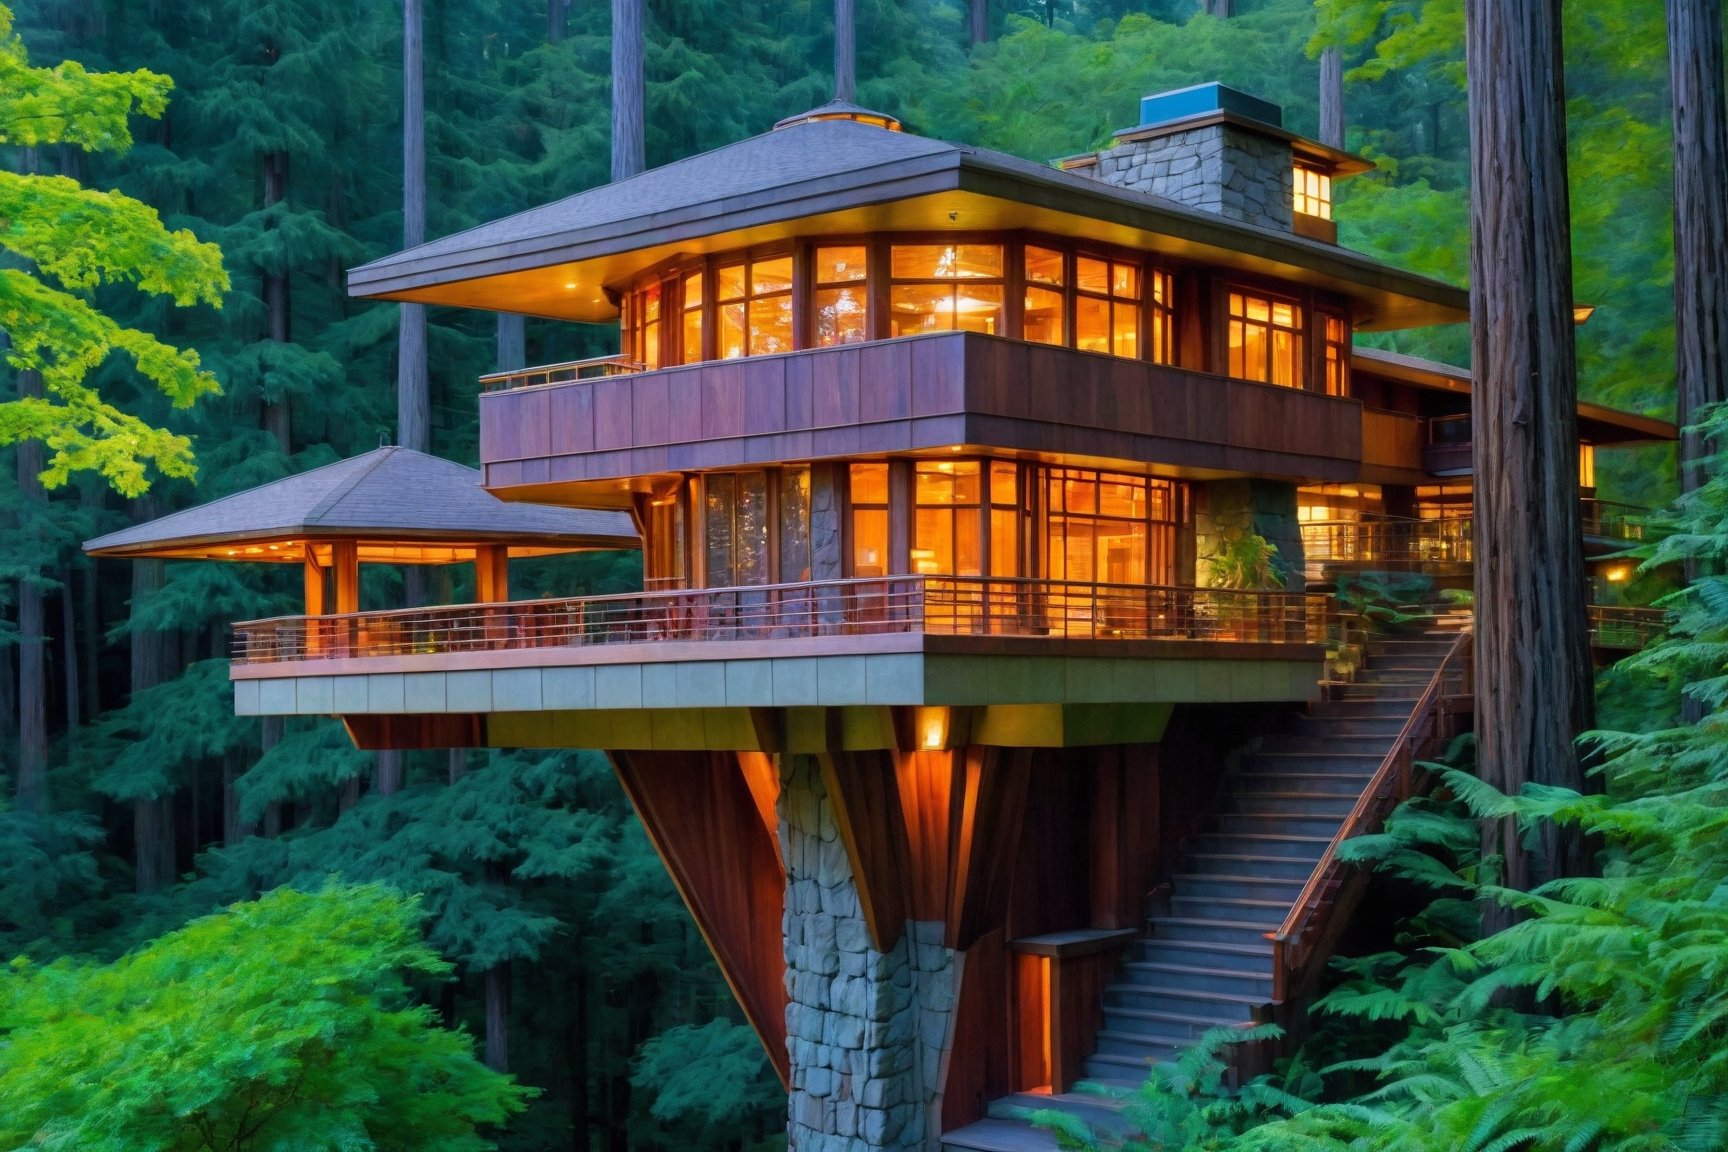 long shot ((masterpiece)), (((best quality))), ((ultra-detailed)), beautiful elaborate realistic ifrank lloyd wright  treehouse deep in a lush green redwood forest,  the tree house is spacious, gorgeous frank lloyd wright style architecture, rock slate foundation, there is a large wooden deck around the perimeter of the treehouse, shafts of light shine through the canopy, night time scene, full moon, lit lanterns,,,aw0k euphoric style,aw0k euphoricred style, long shot from above looking down, frank lloyd wright 
